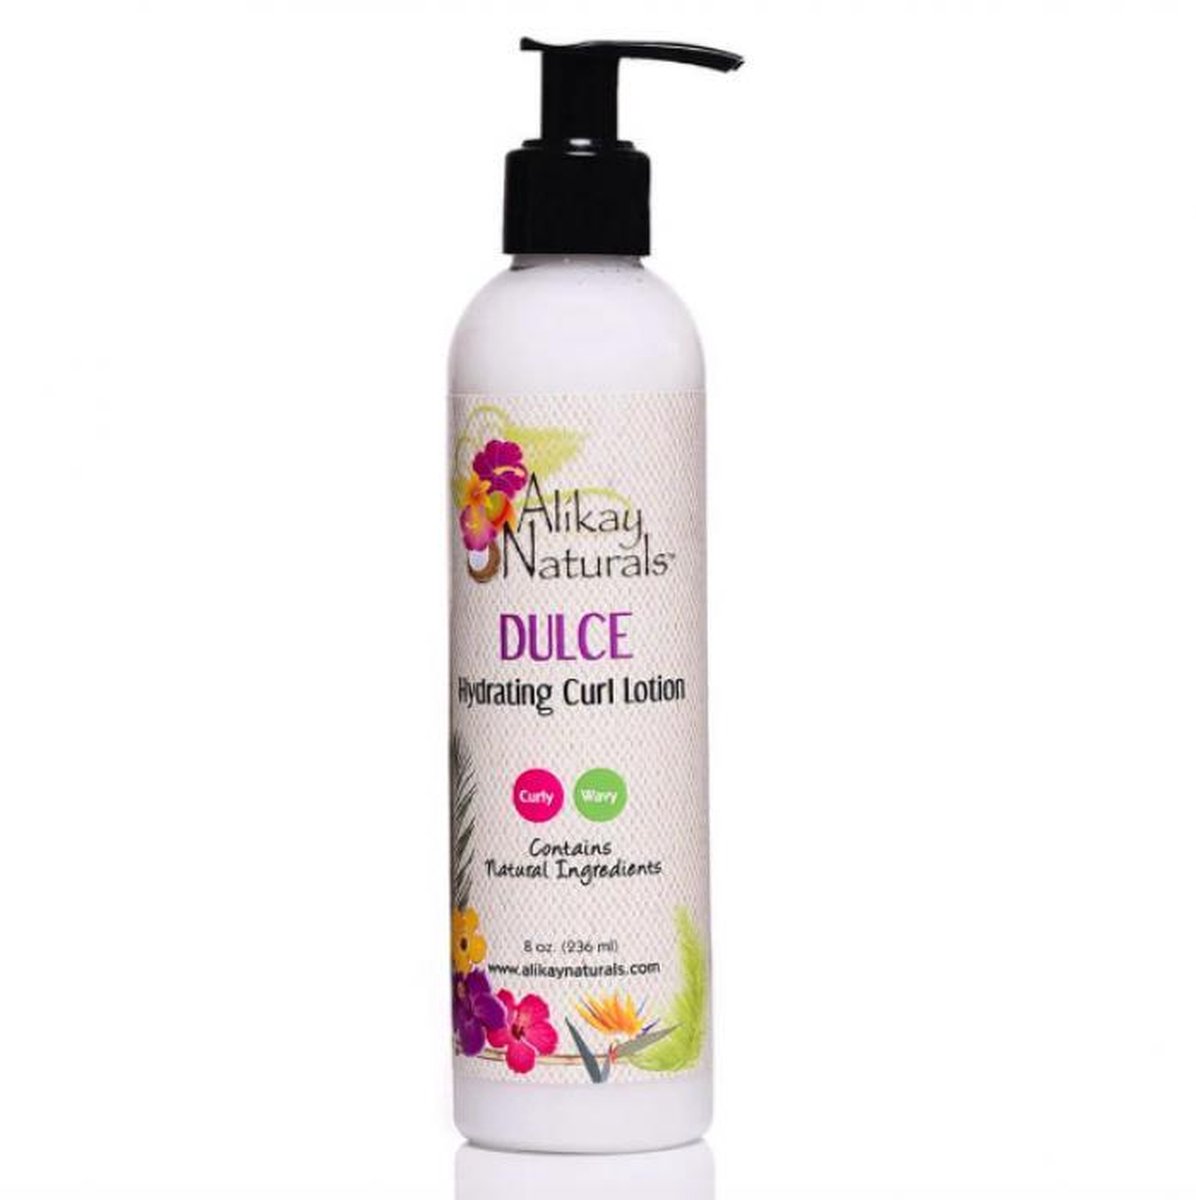 Alikay Naturals Dulce Hydration Curl Lotion 236ml